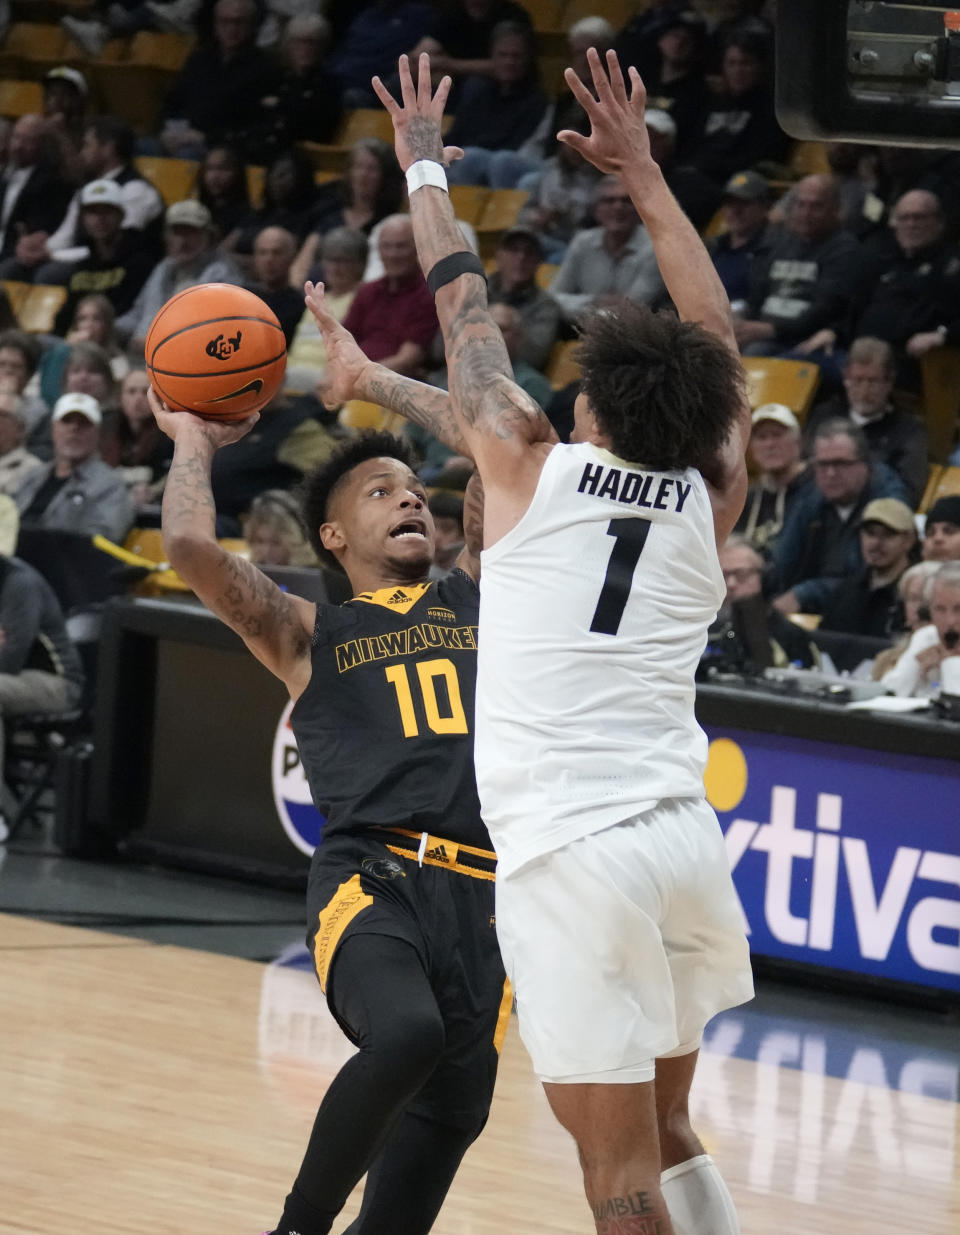 Milwaukee guard BJ Freeman, left, drives the lane to shoot over Colorado guard J'Vonne Hadley during the first half of an NCAA college basketball game Tuesday, Nov. 14, 2023, in Boulder, Colo. (AP Photo/David Zalubowski)